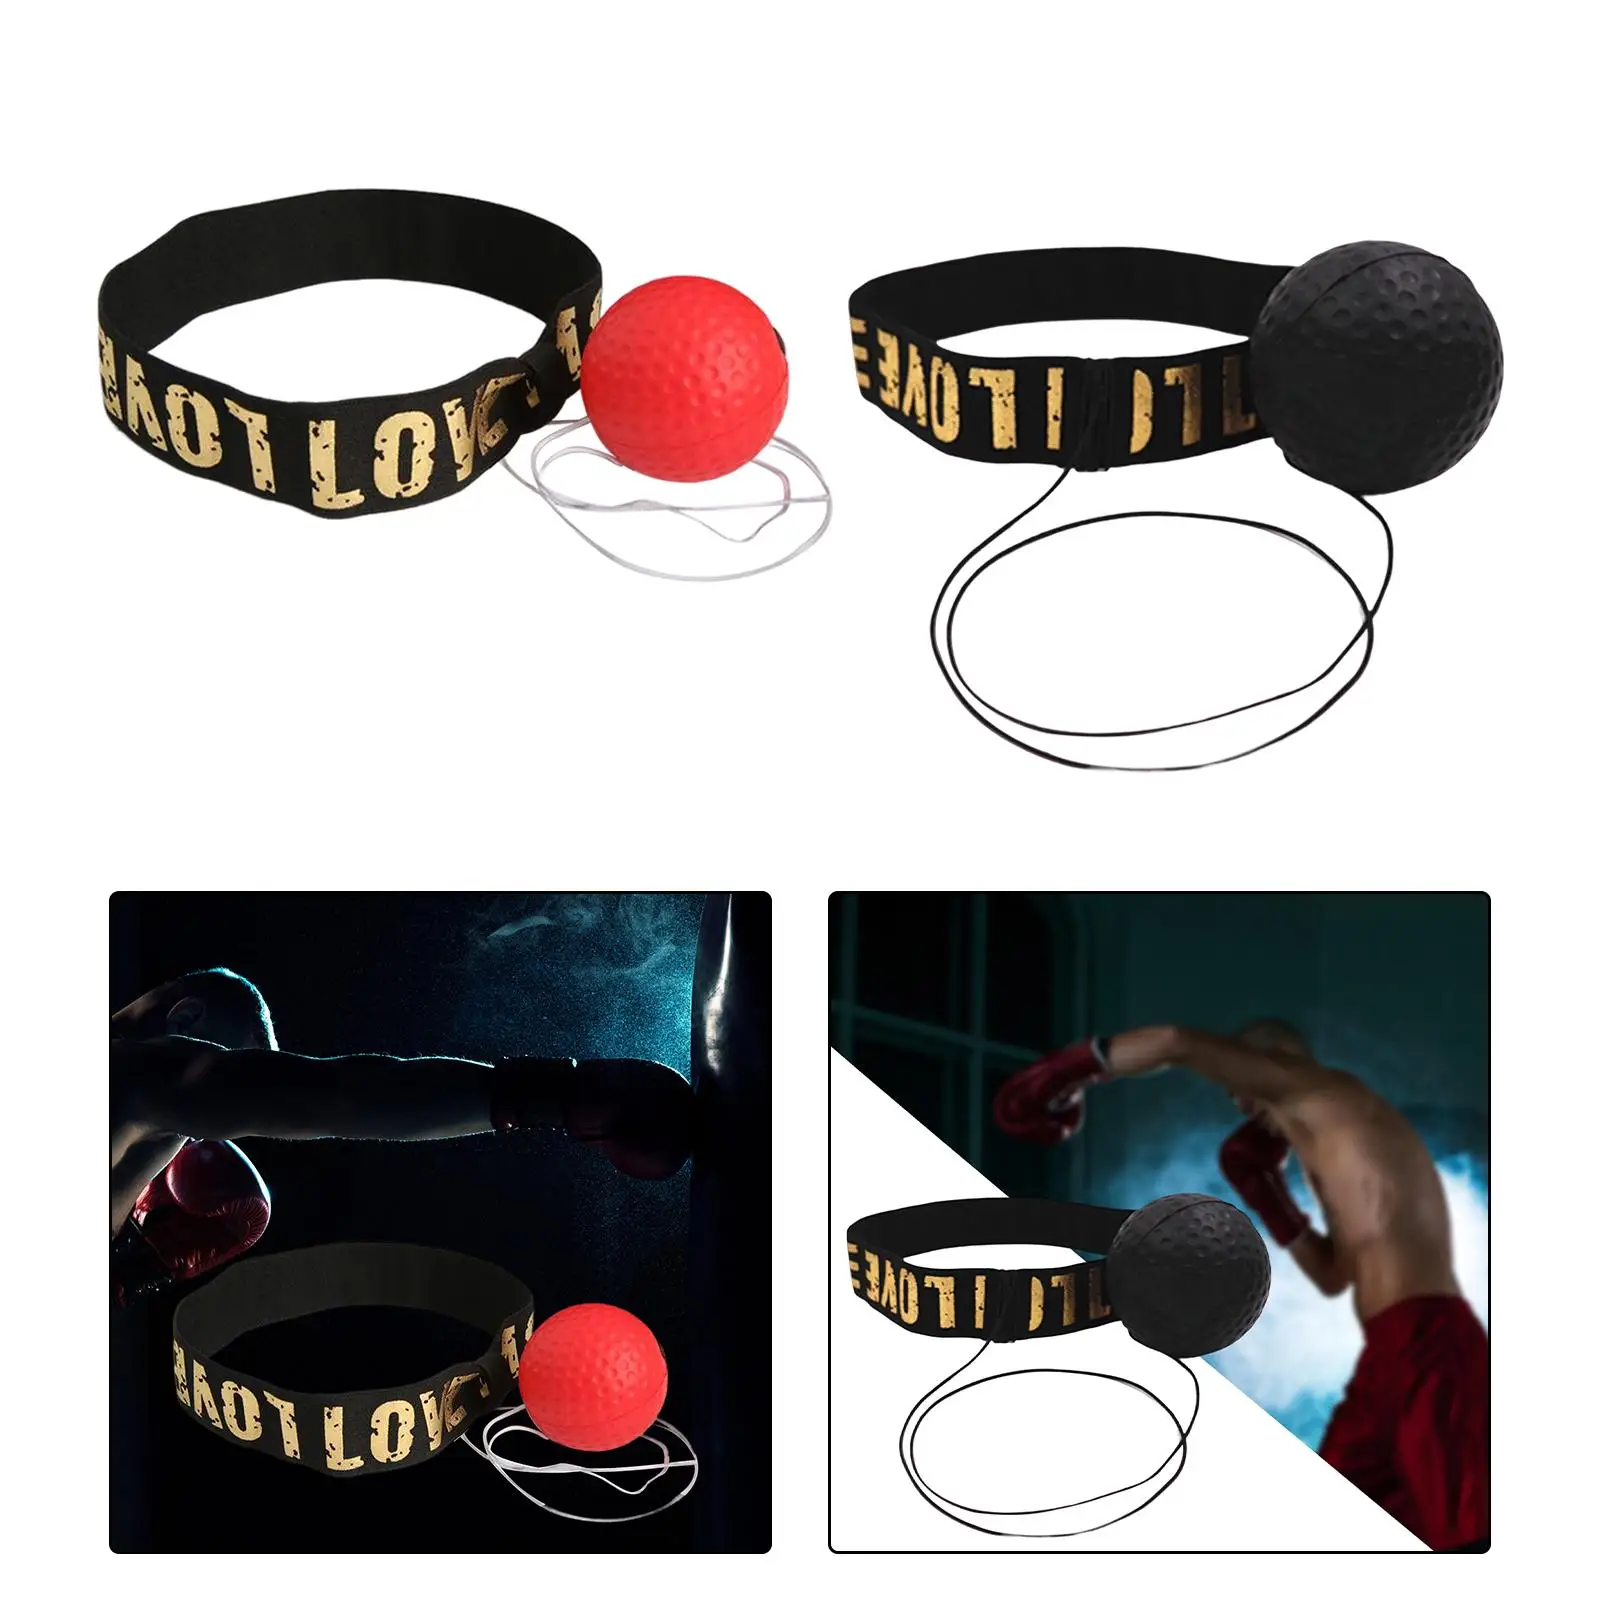 Boxing Reflex Ball Headband Mma Boxing Equipment React Reflex Balls for Agility Punch Practice Fitness Home Gym Sports Trainer